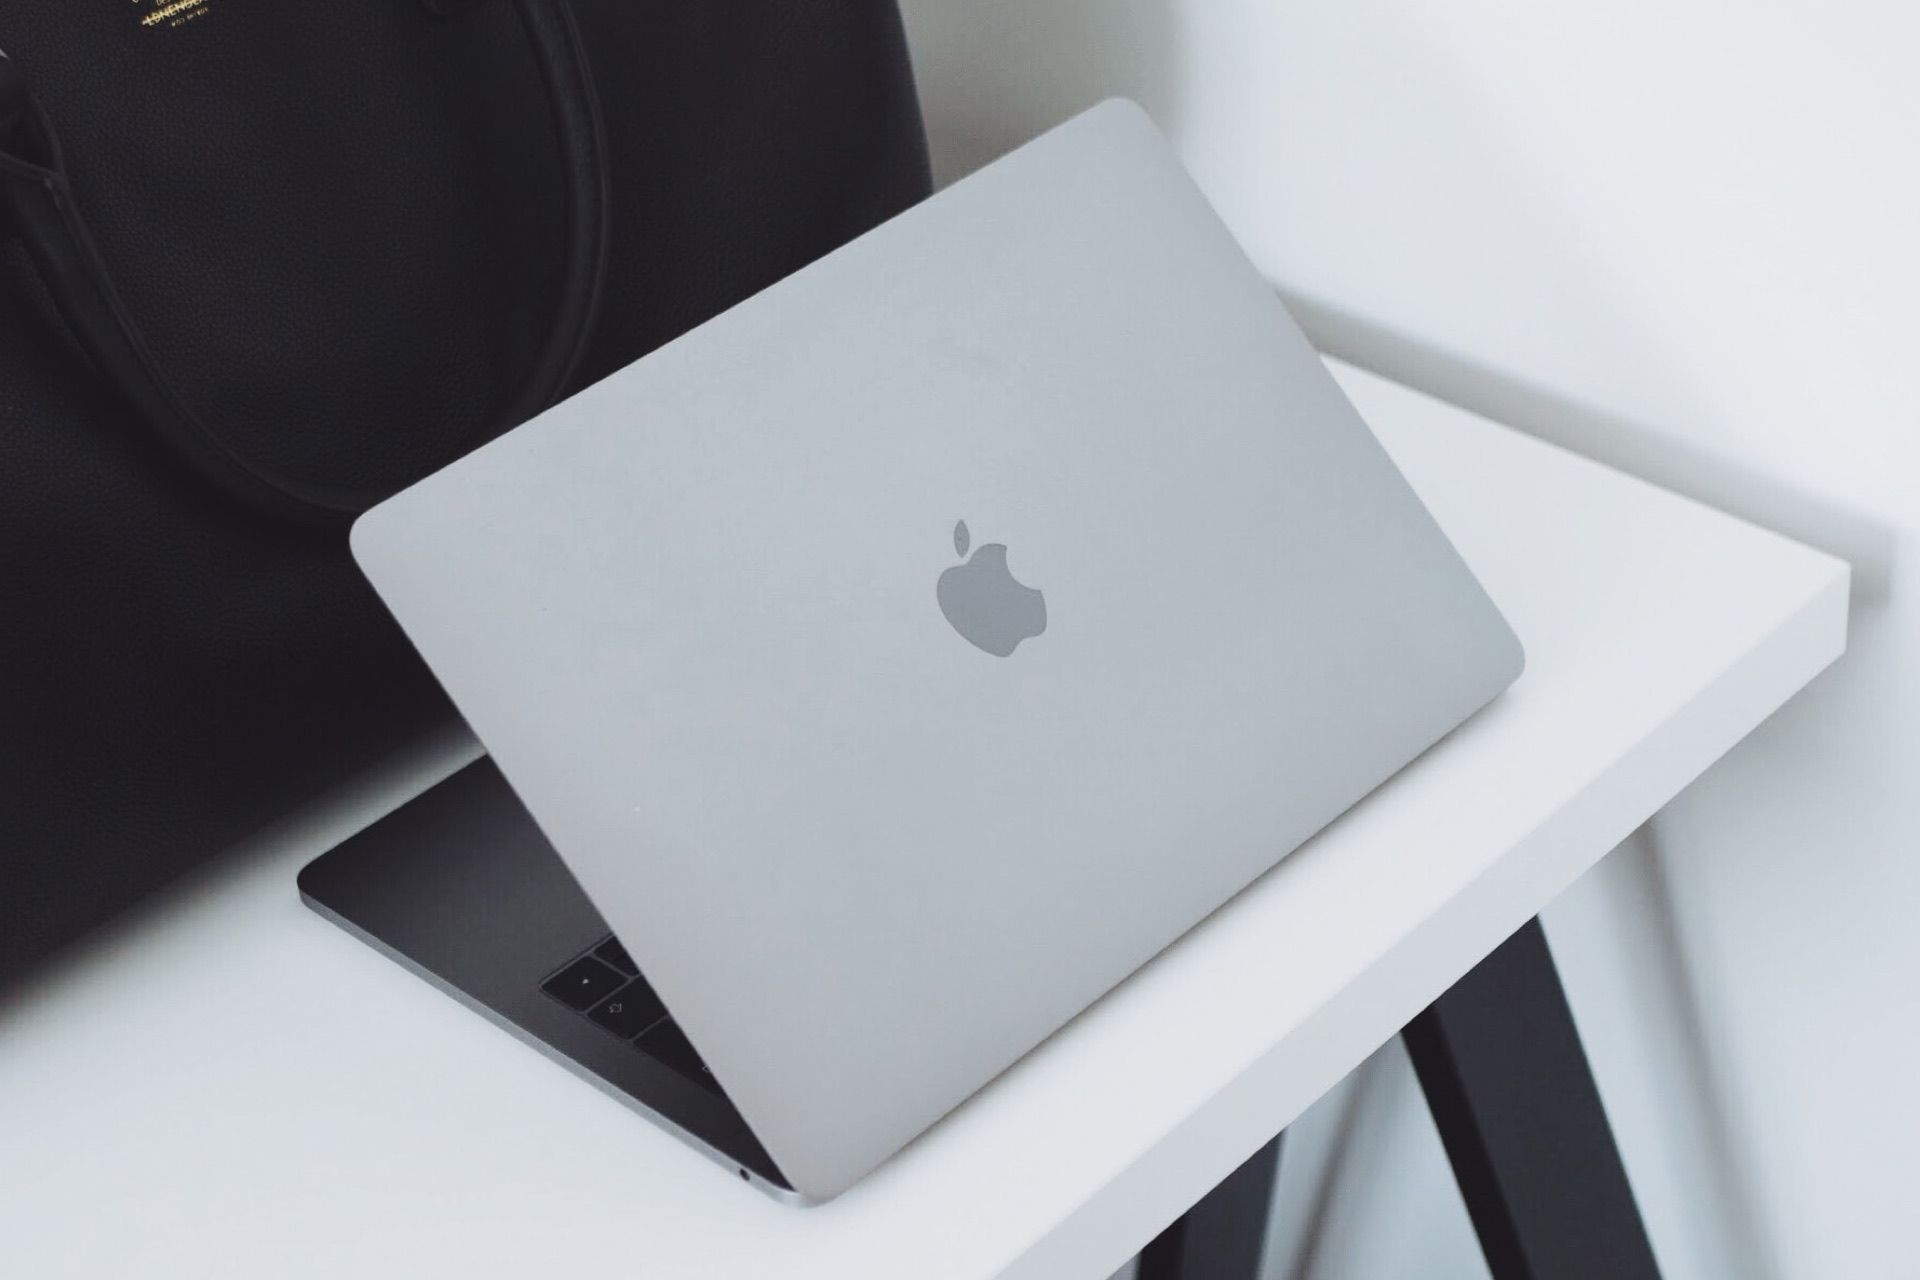 Is the M1 MacBook Air still worth buying today?